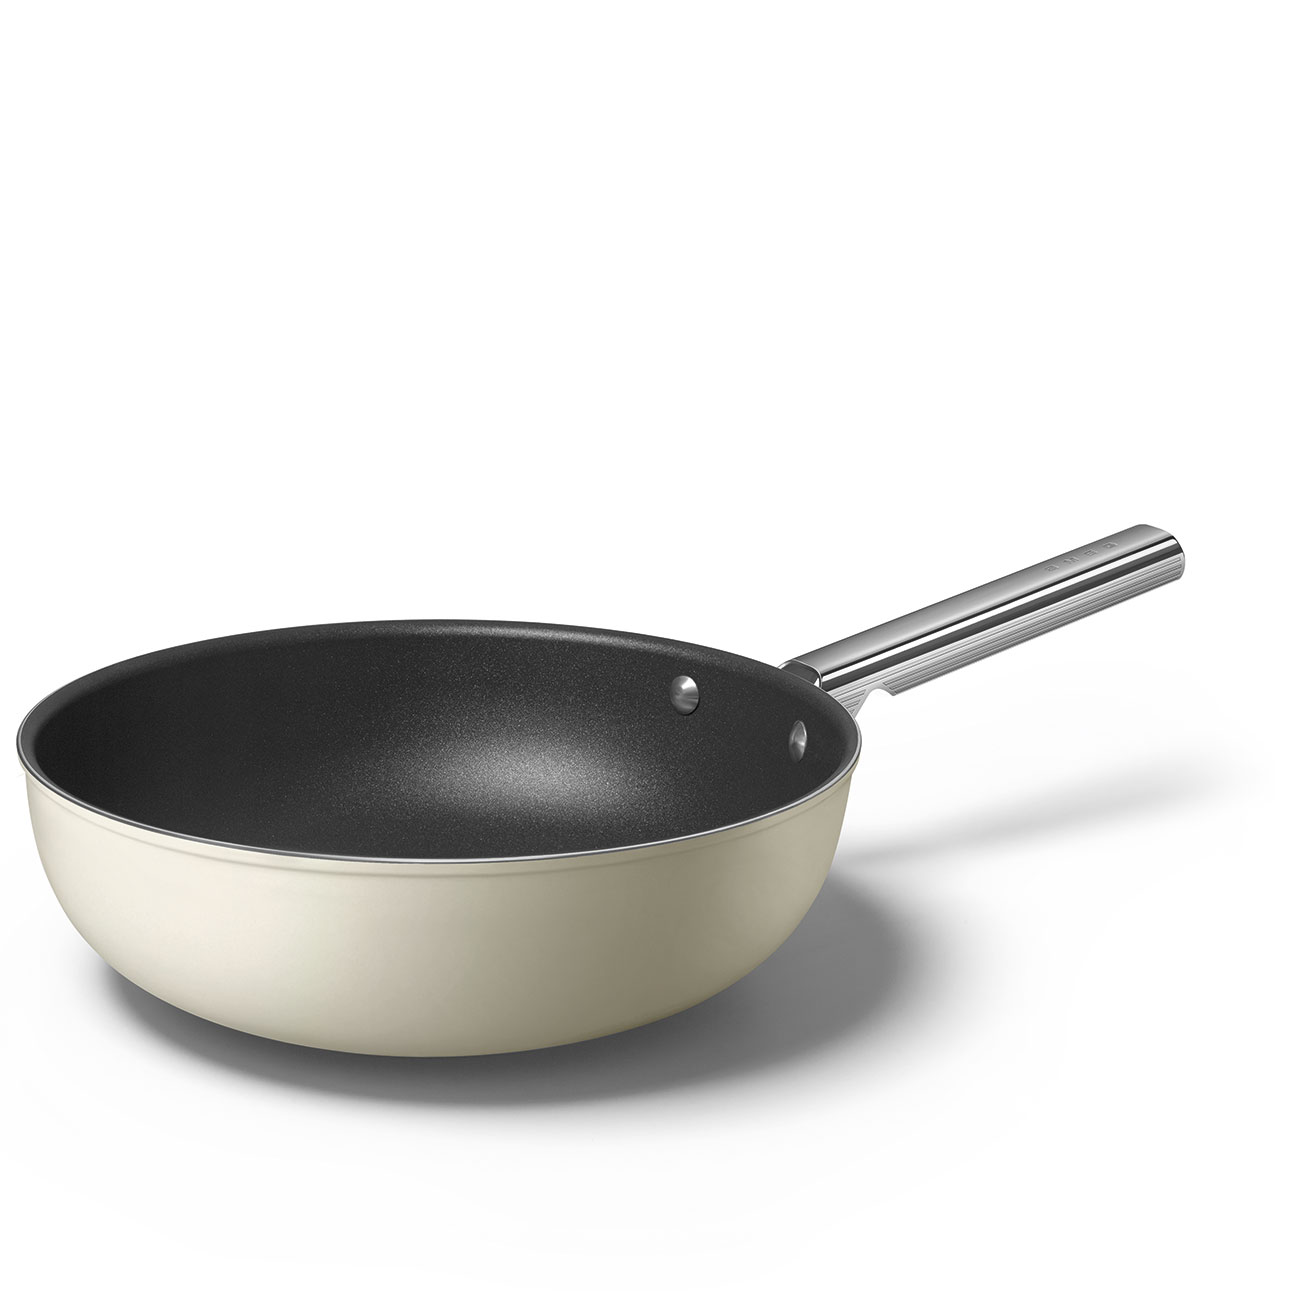 Smeg Cream Non-stick Wok with Stainless Steel Handle - CKFW3001CRM_7